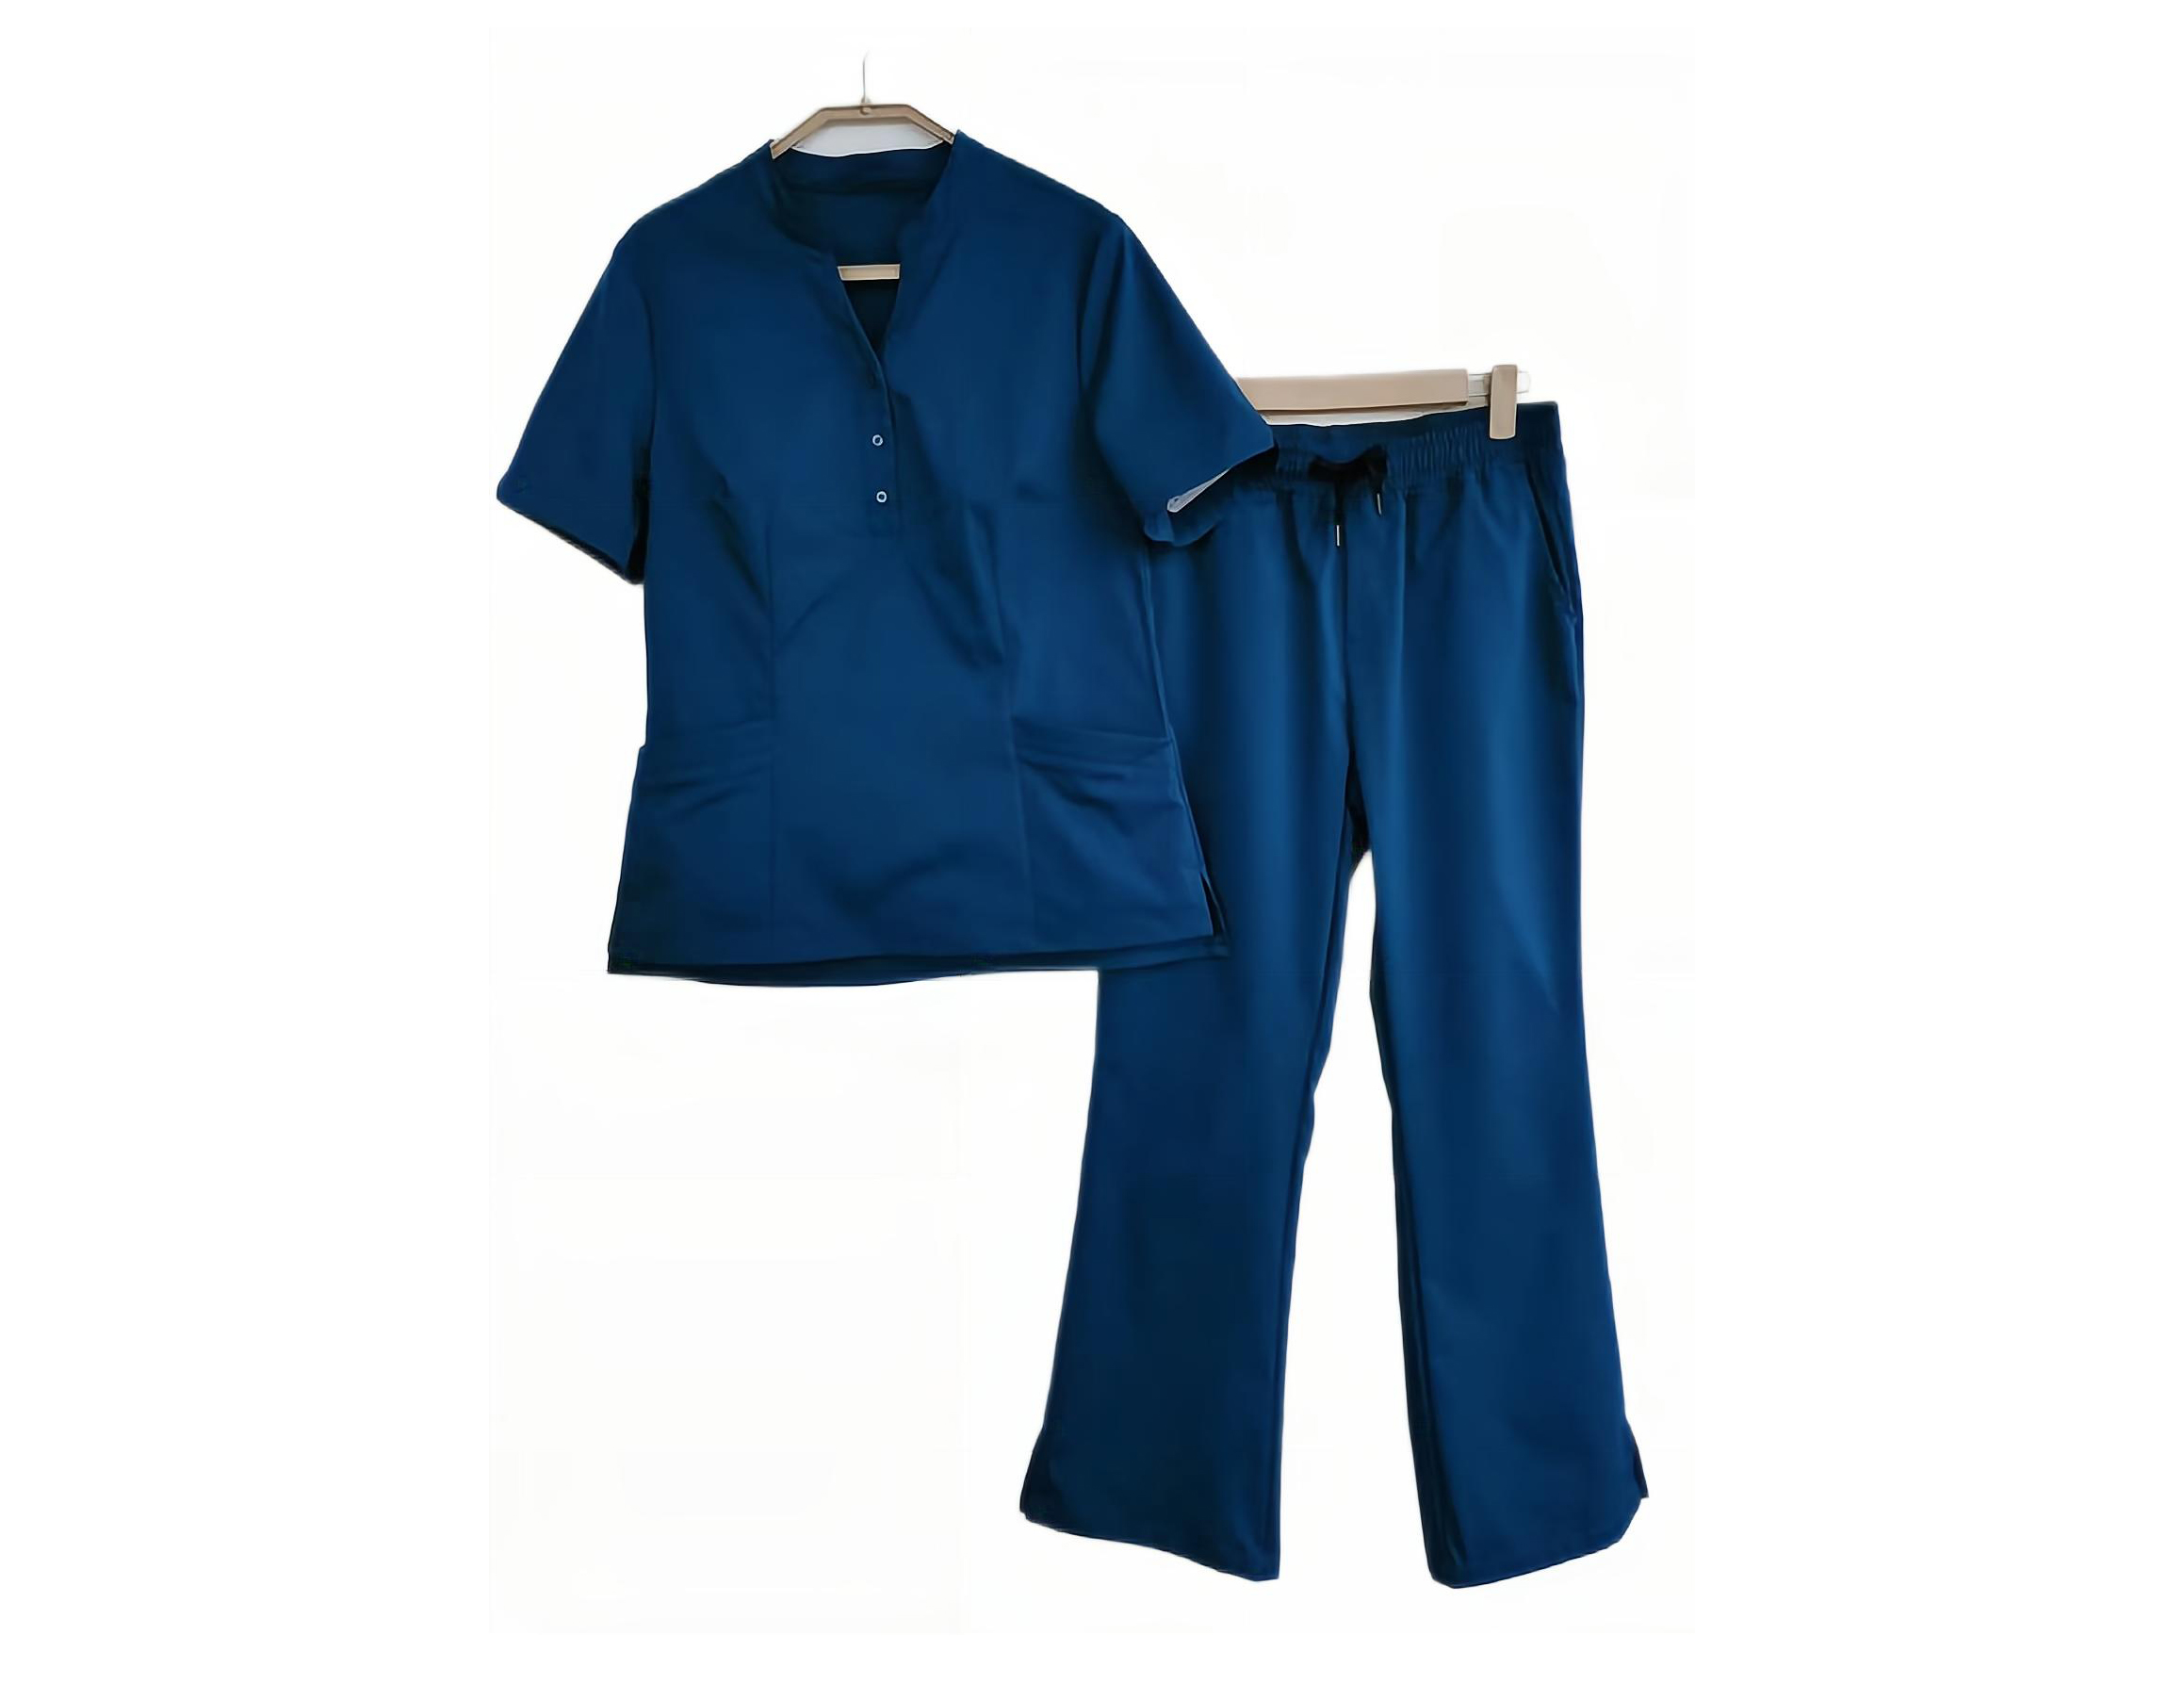 Ladies Nurse Scrub Uniform or SPA Beauty Salon Uniform with Stand Collar Tunic and Flare Let Pant